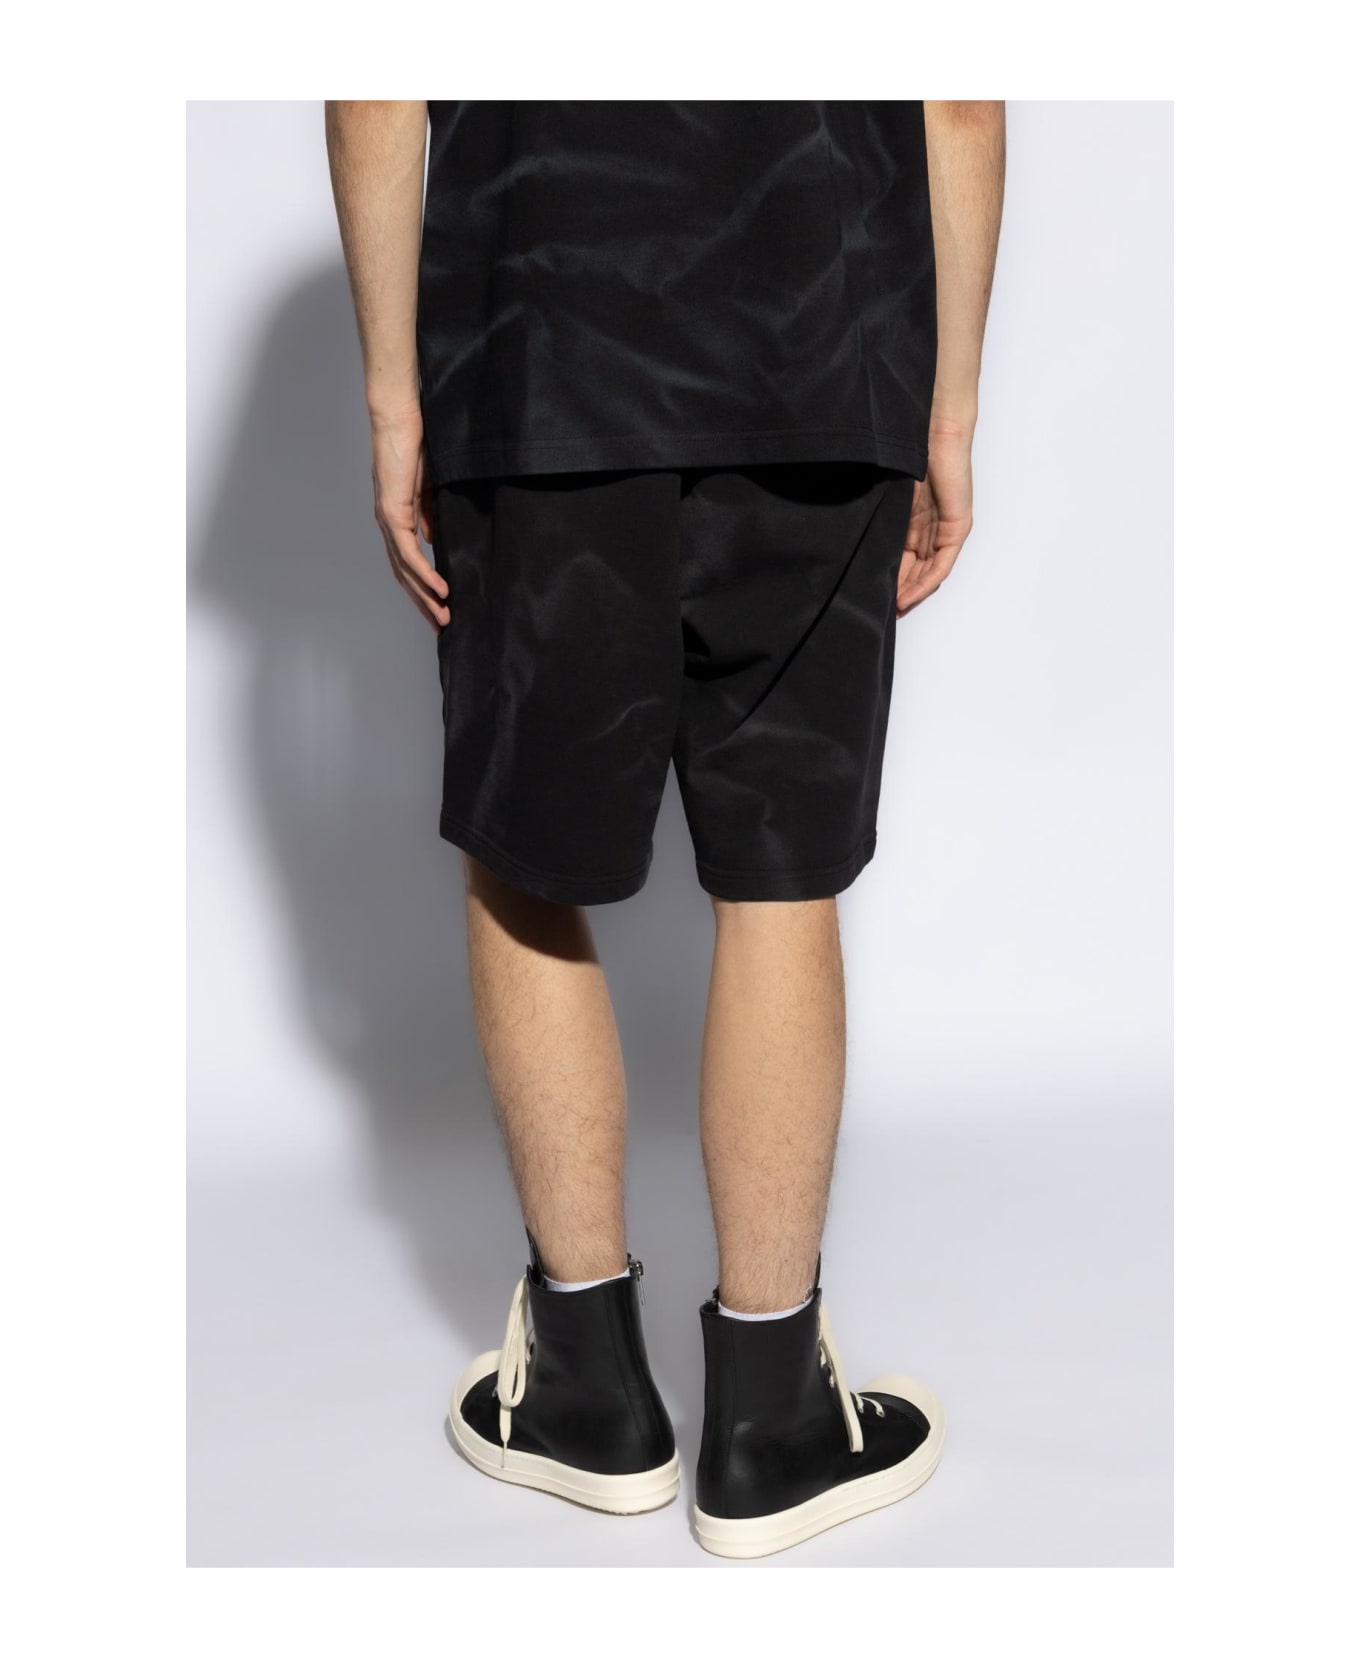 44 Label Group Cotton Shorts With Print - Black+effetto smoke